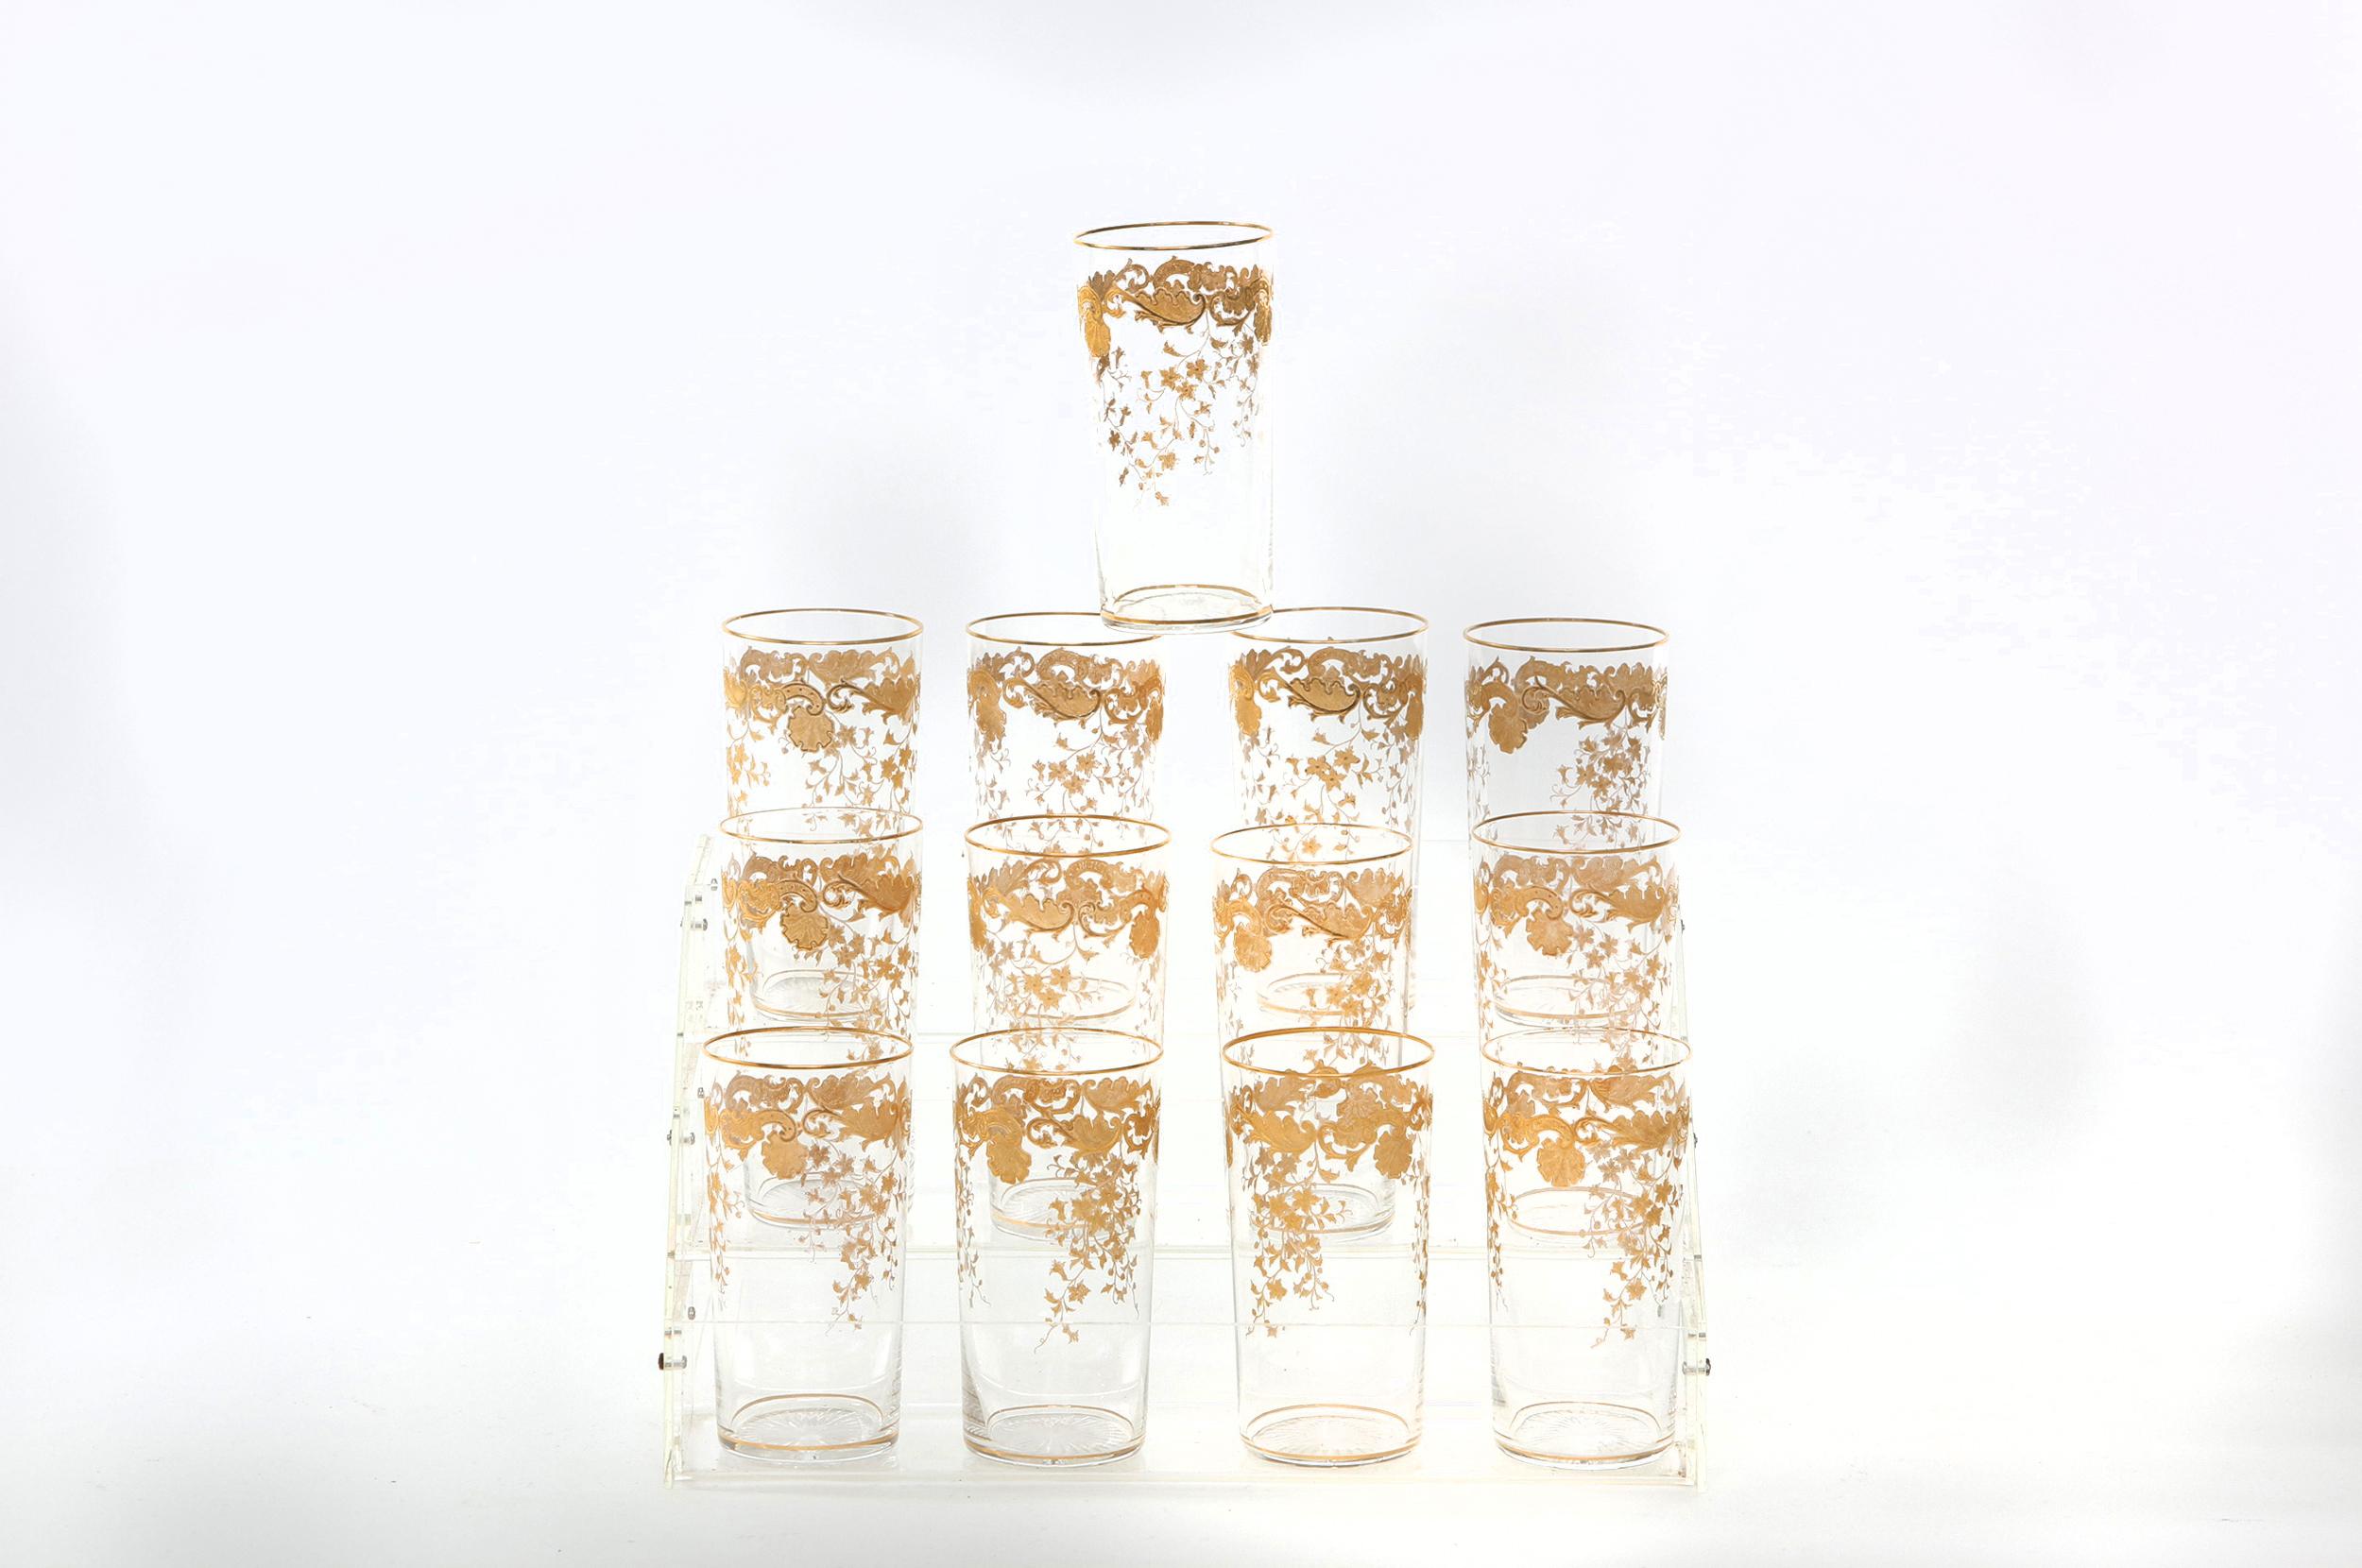 Mid-20th century Saint Louis crystal with gold design details tableware / barware drink service for twelve people. Each one is in great condition. Maker's mark stamped undersigned. Each one stands about 5 inches tall x 2.5 inches diameter.